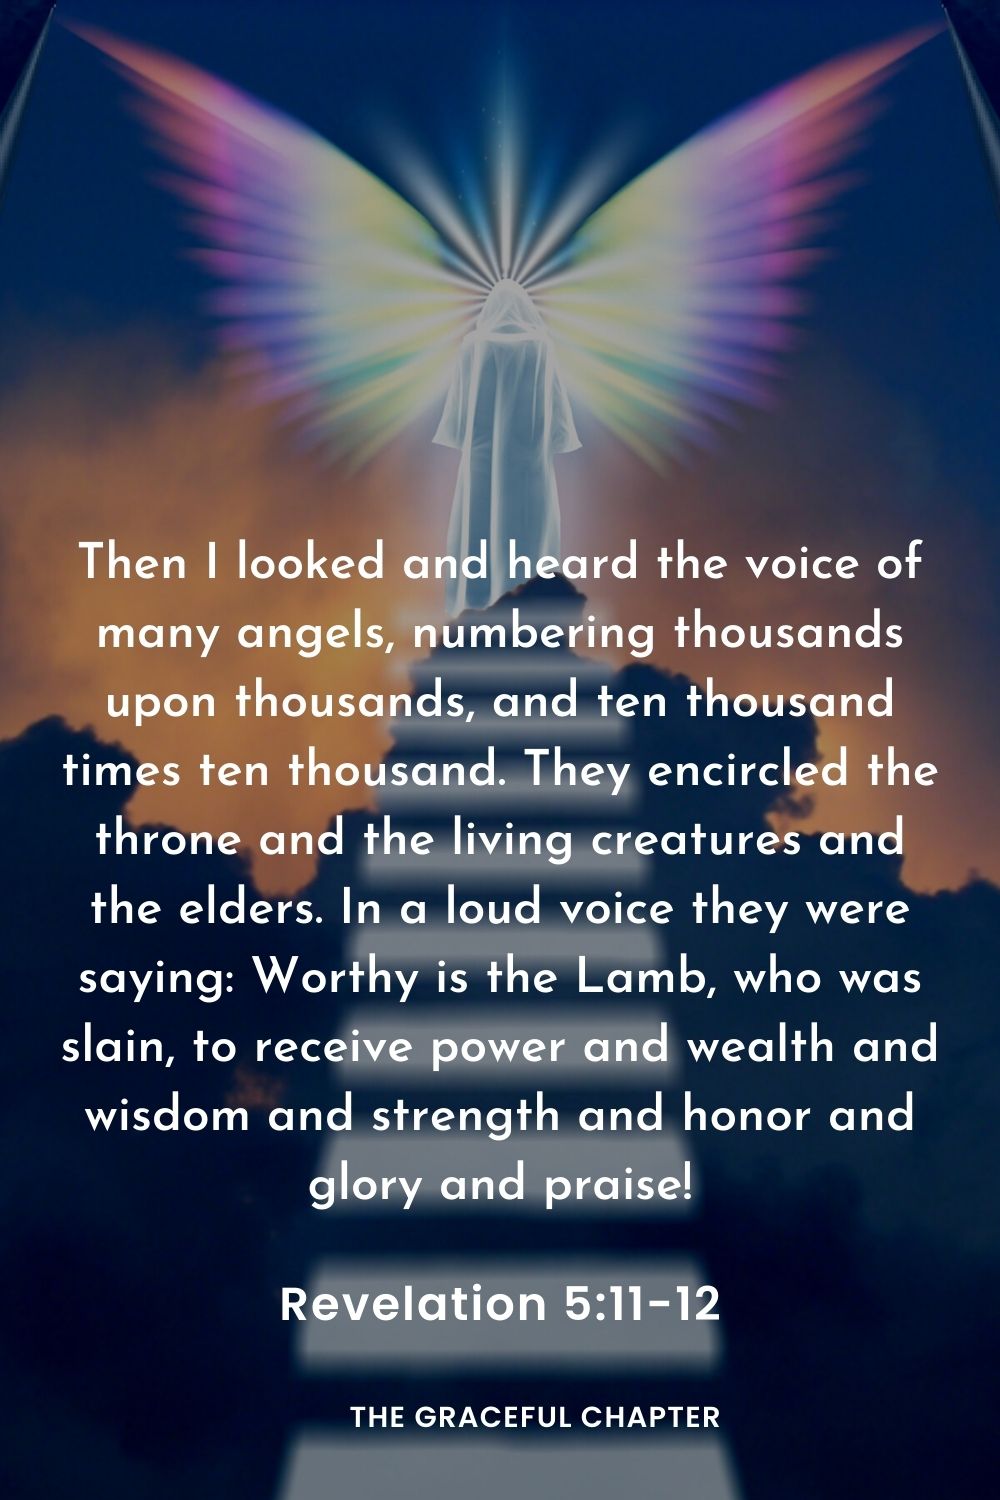 Then I looked and heard the voice of many angels, numbering thousands upon thousands, and ten thousand times ten thousand. They encircled the throne and the living creatures and the elders. In a loud voice they were saying: Worthy is the Lamb, who was slain, to receive power and wealth and wisdom and strength and honor and glory and praise!